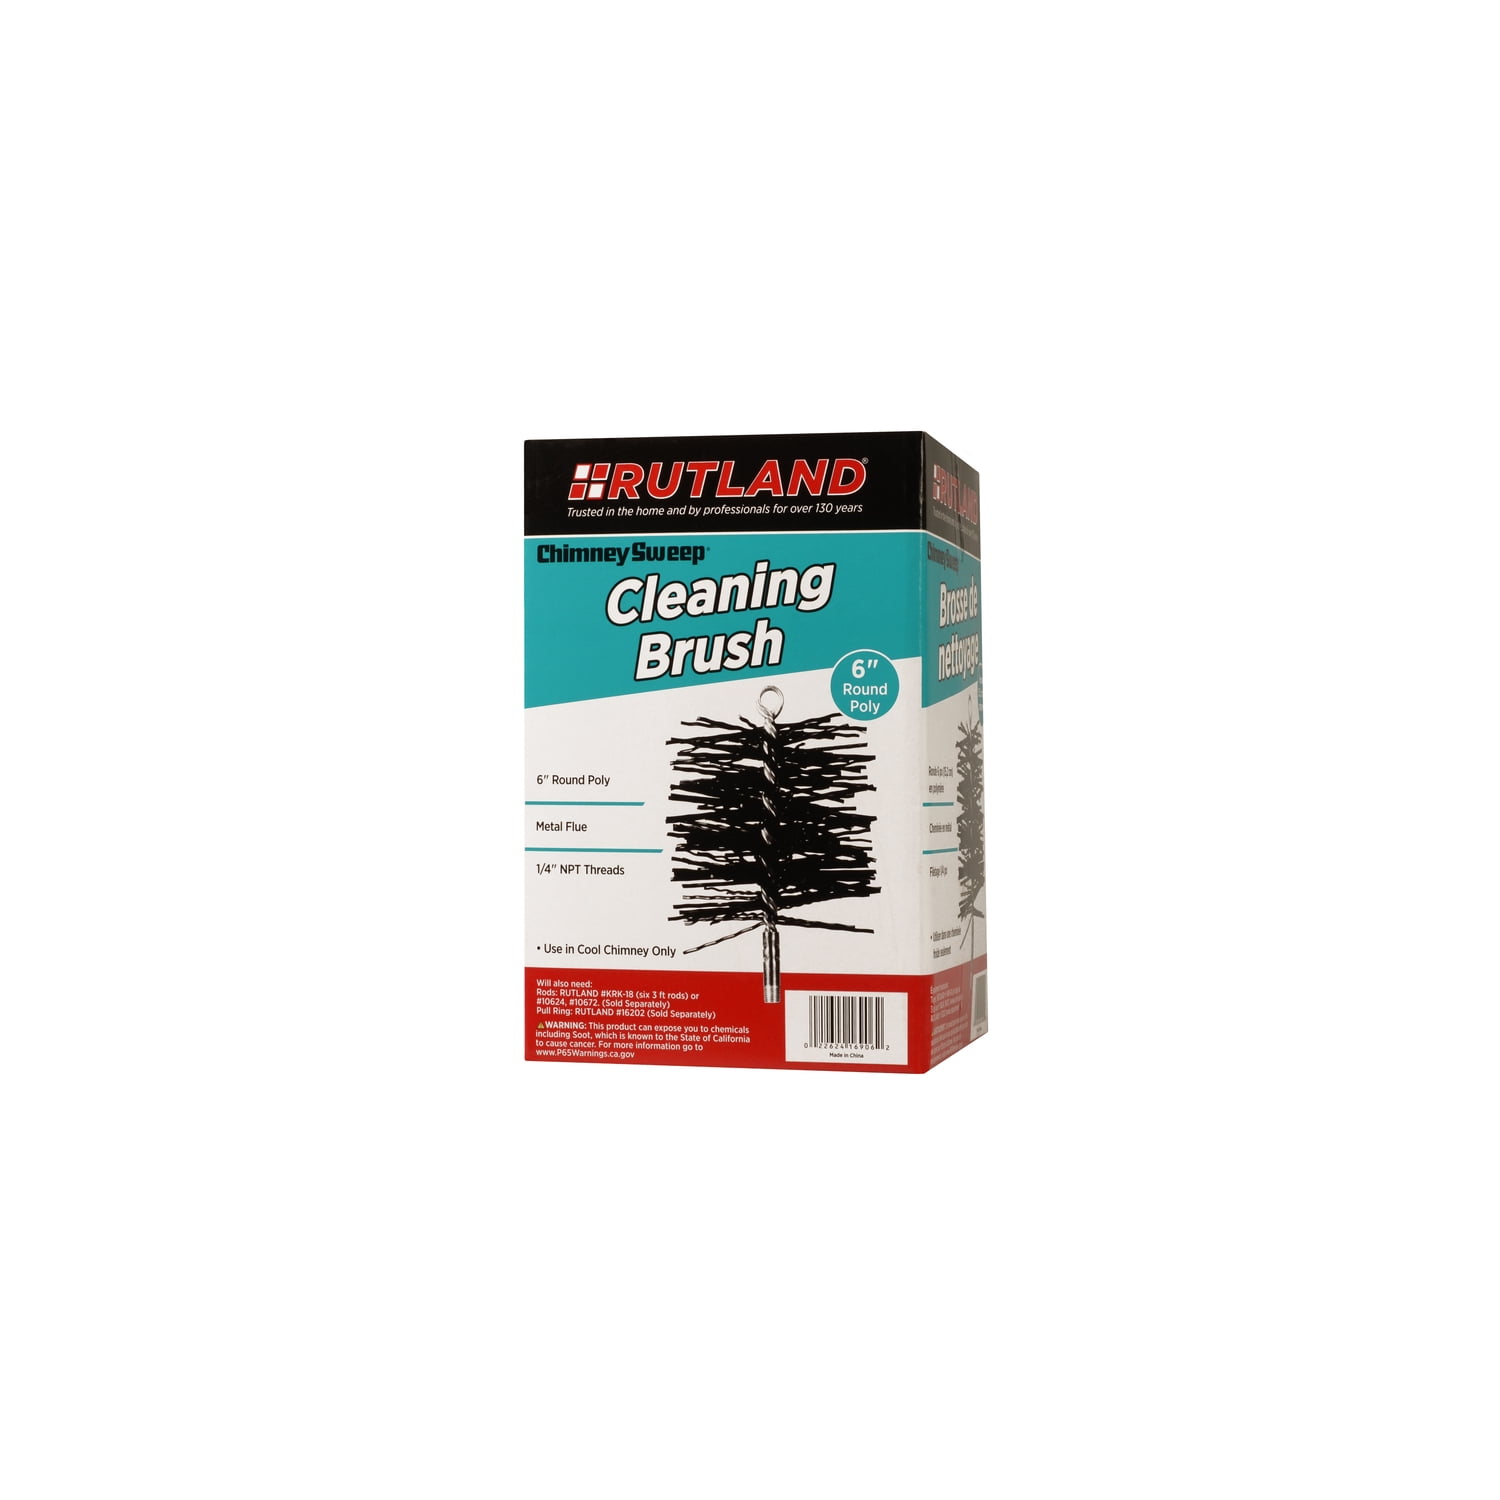 2 BRUSHES Rutland Products 16906 6-Inch Poly Chimney Cleaning Brush